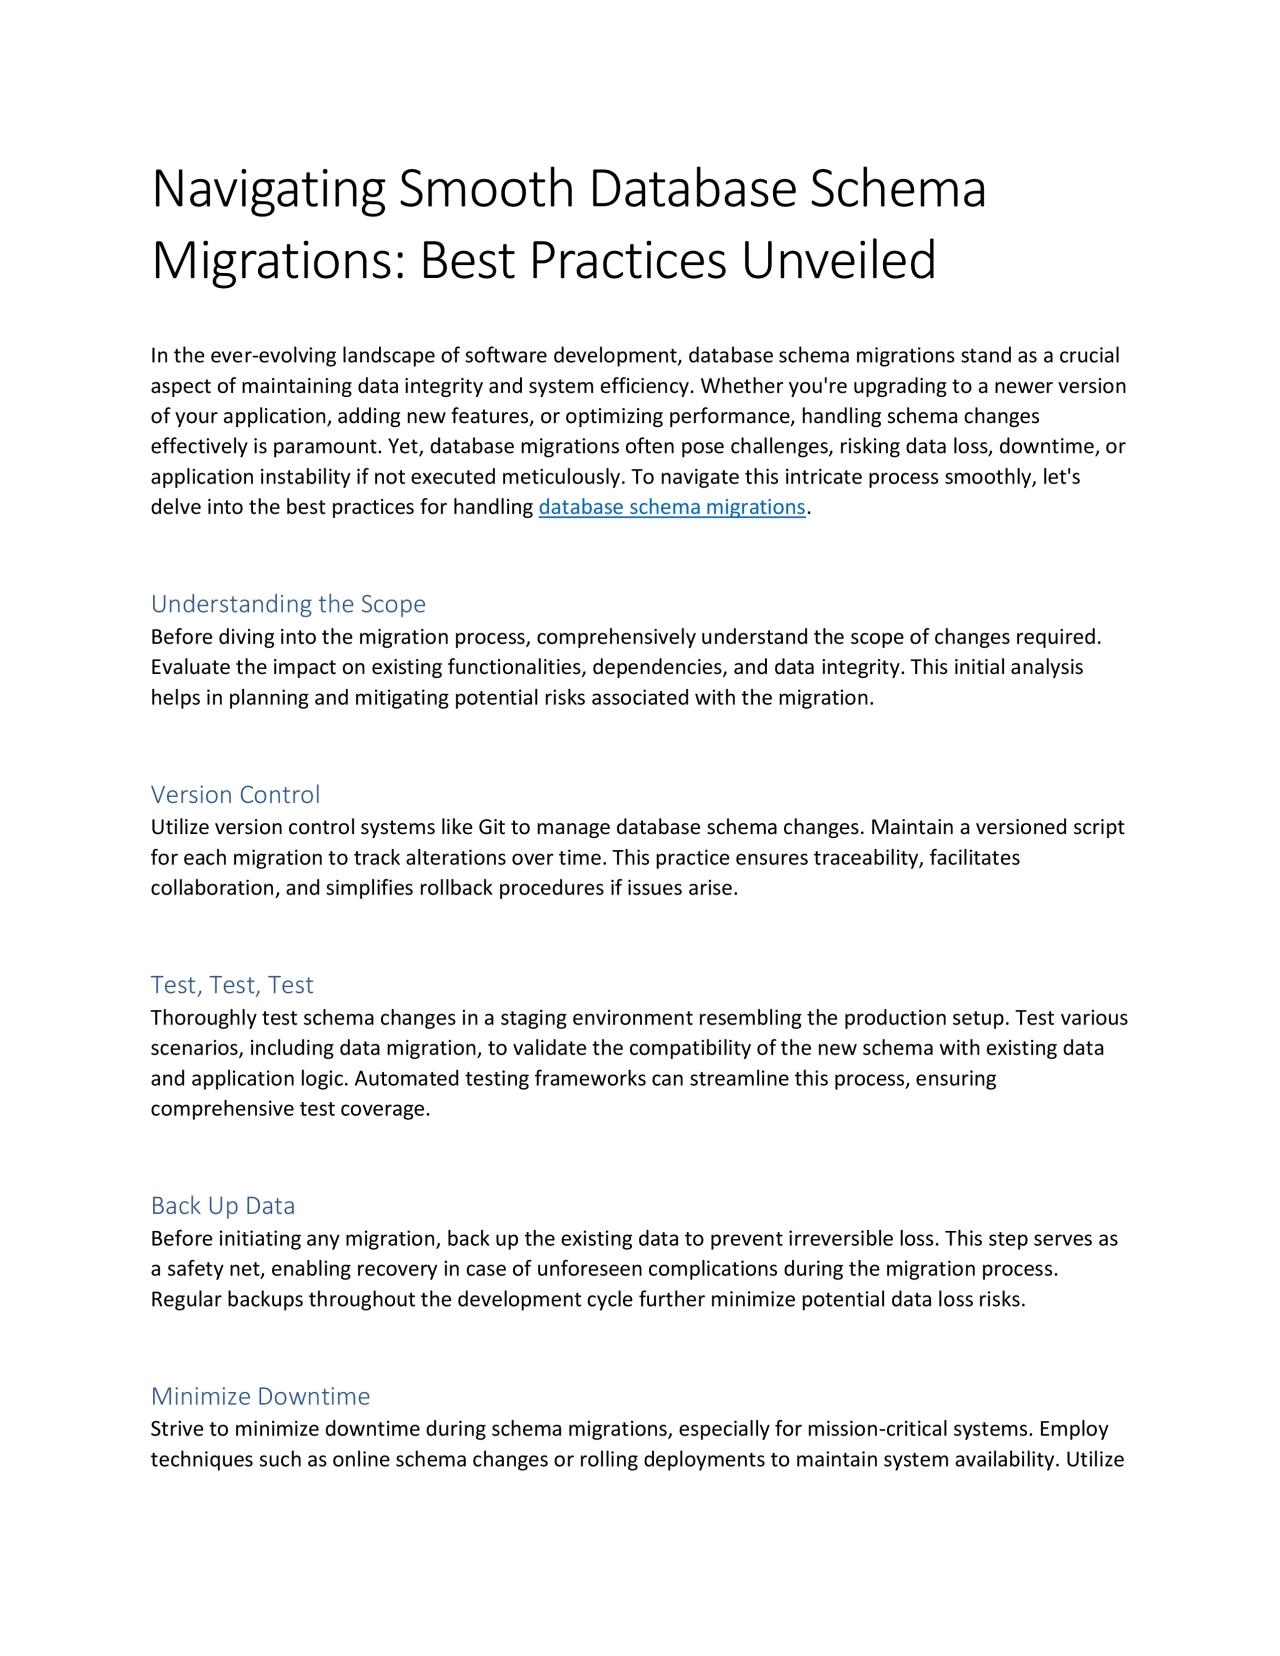 Navigating Smooth Database Schema Migrations: Best Practices Unveiled